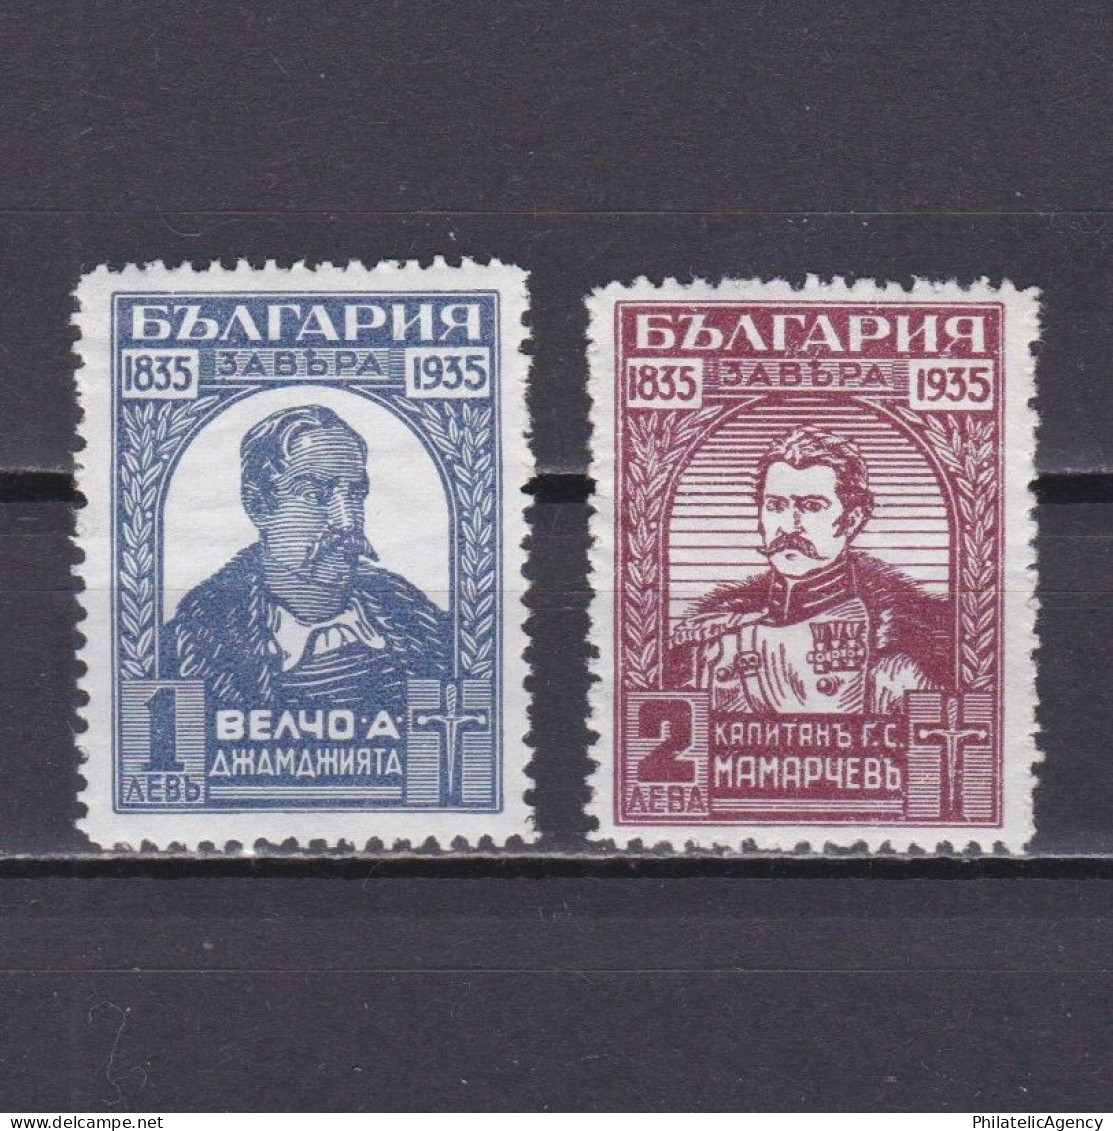 BULGARIA 1935, Sc# 265-266, Uprising Against The Turks, MNH - Unused Stamps